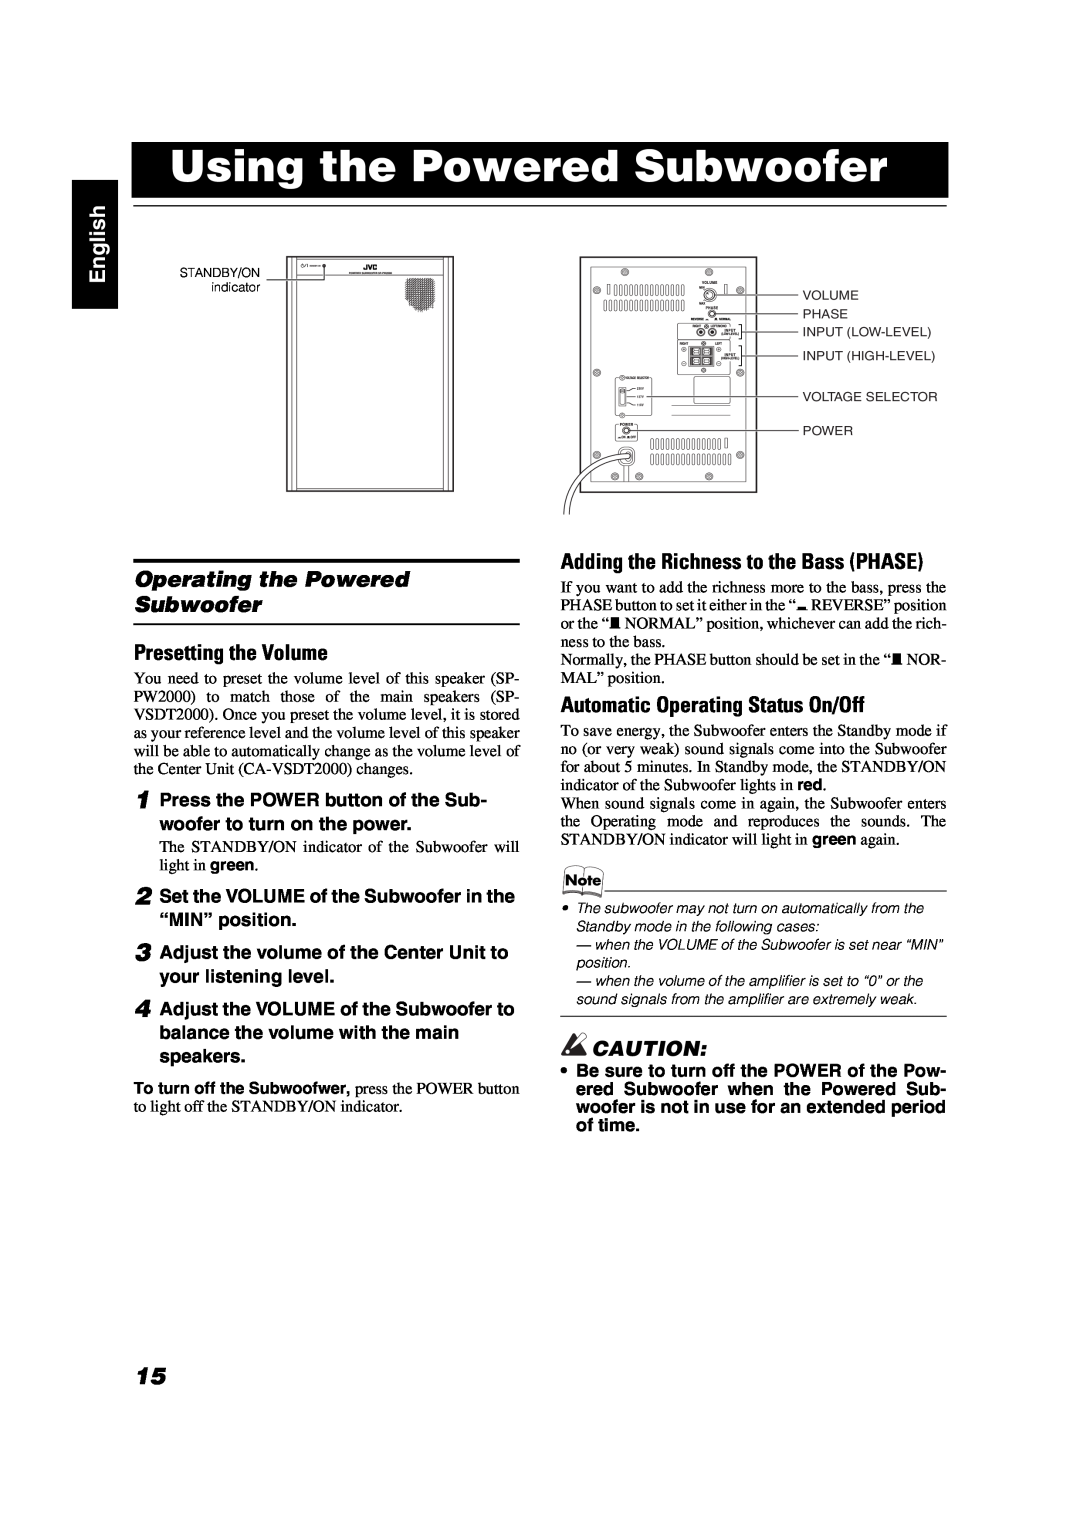 JVC VS-DT2000 manual Using the Powered Subwoofer, English, Operating the Powered Subwoofer, Presetting the Volume 